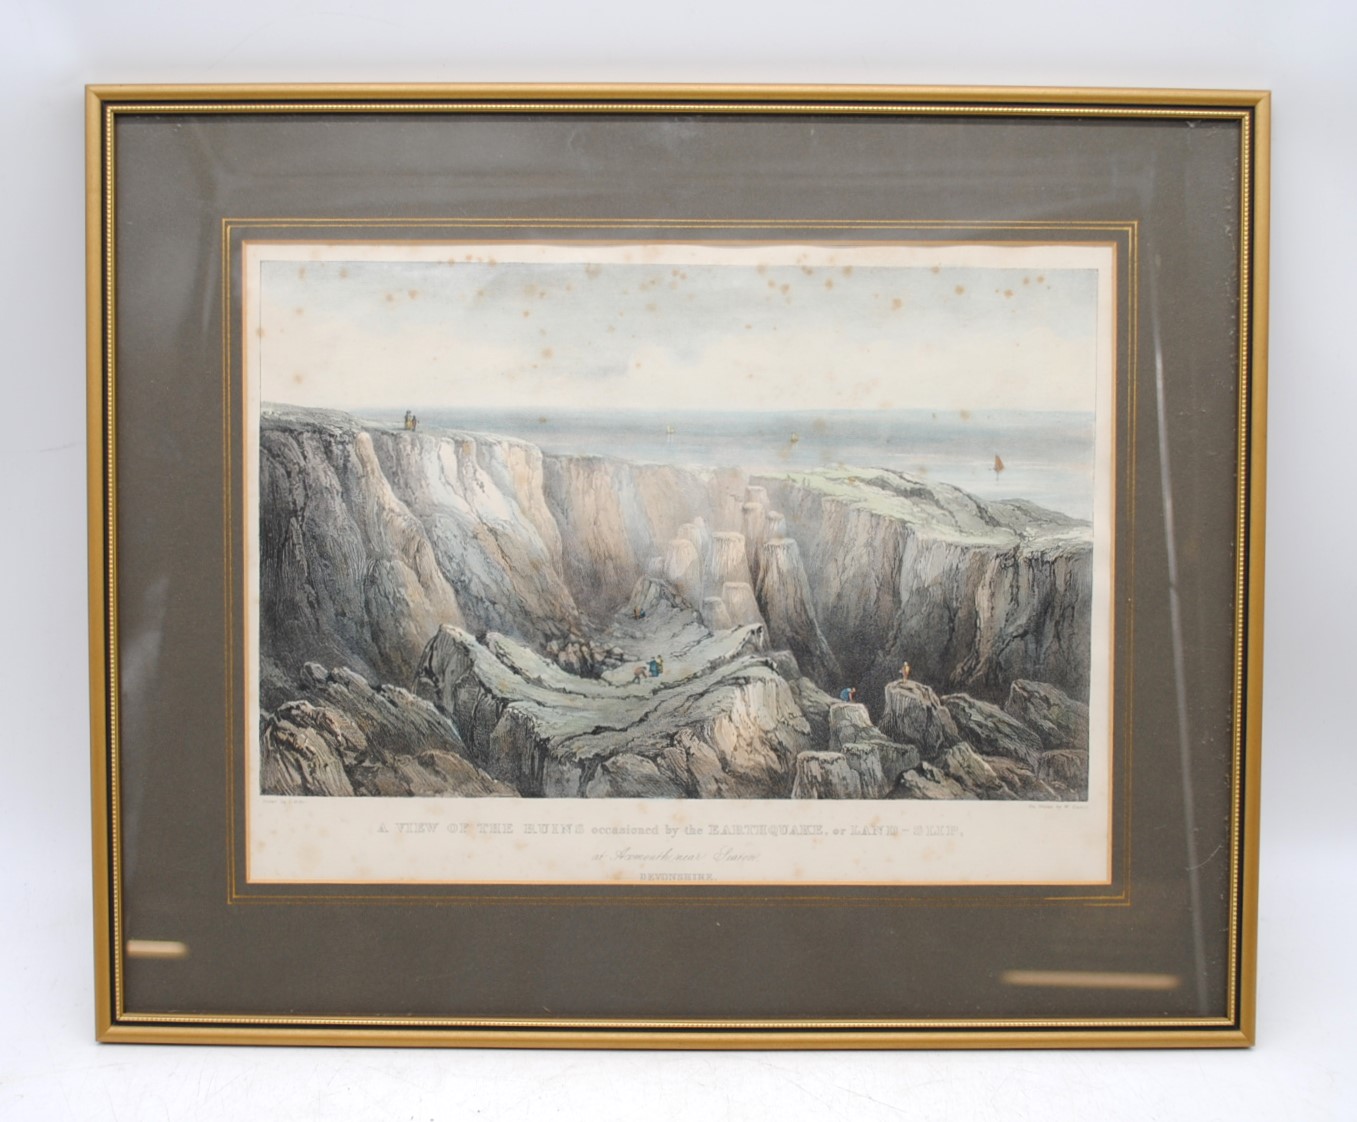 'A view of the ruins occasioned by the earthquake, or landslip at Axmouth near Seaton, Devonshire'